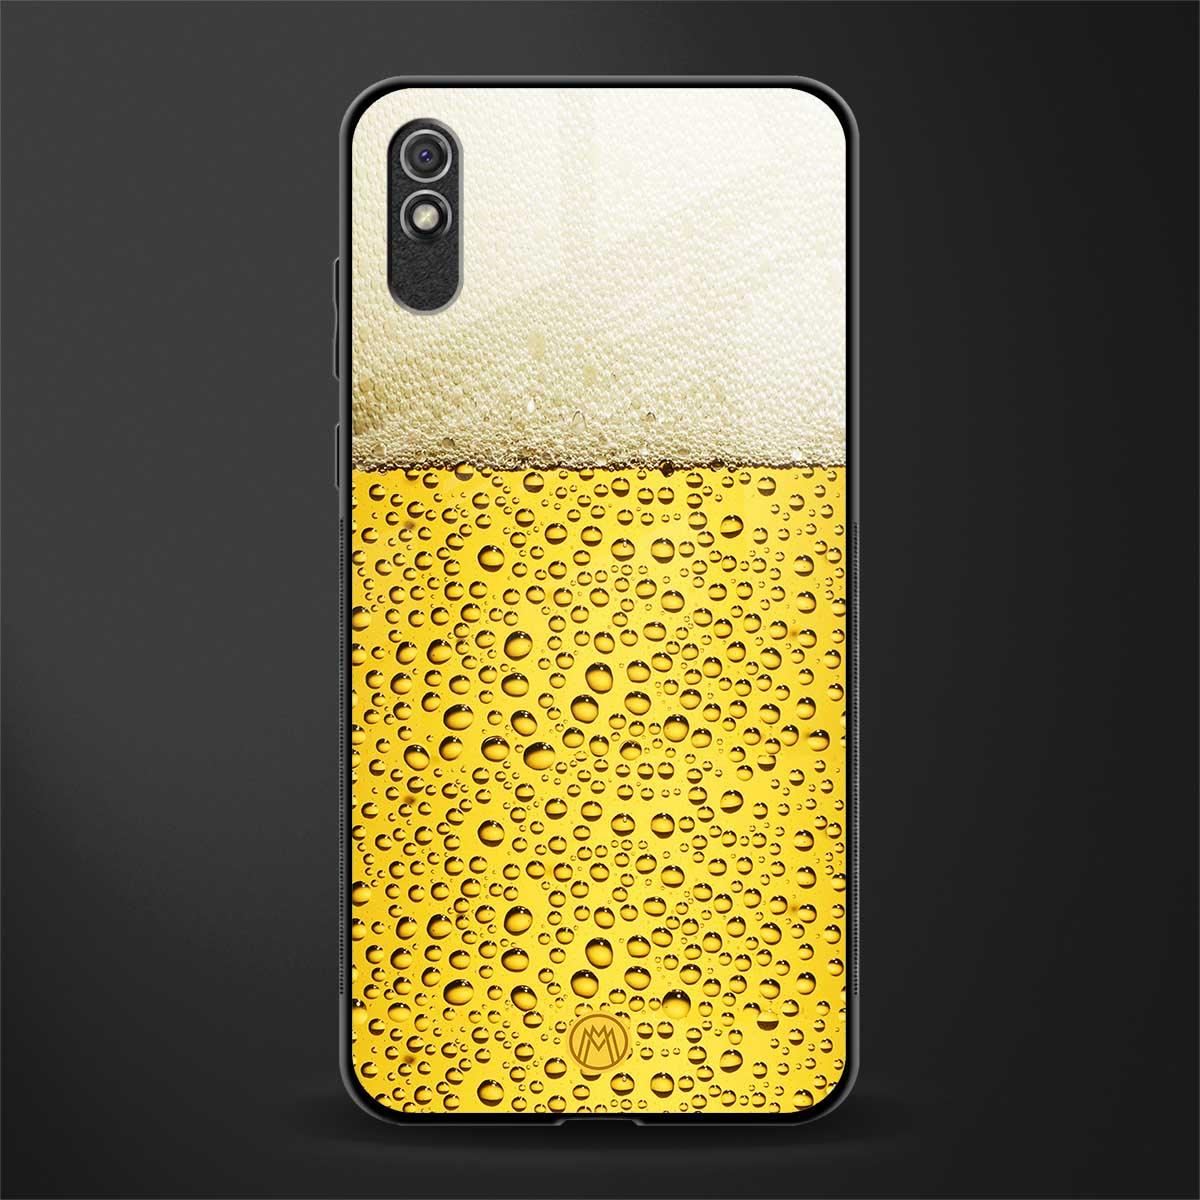 fizzy beer glass case for redmi 9i image